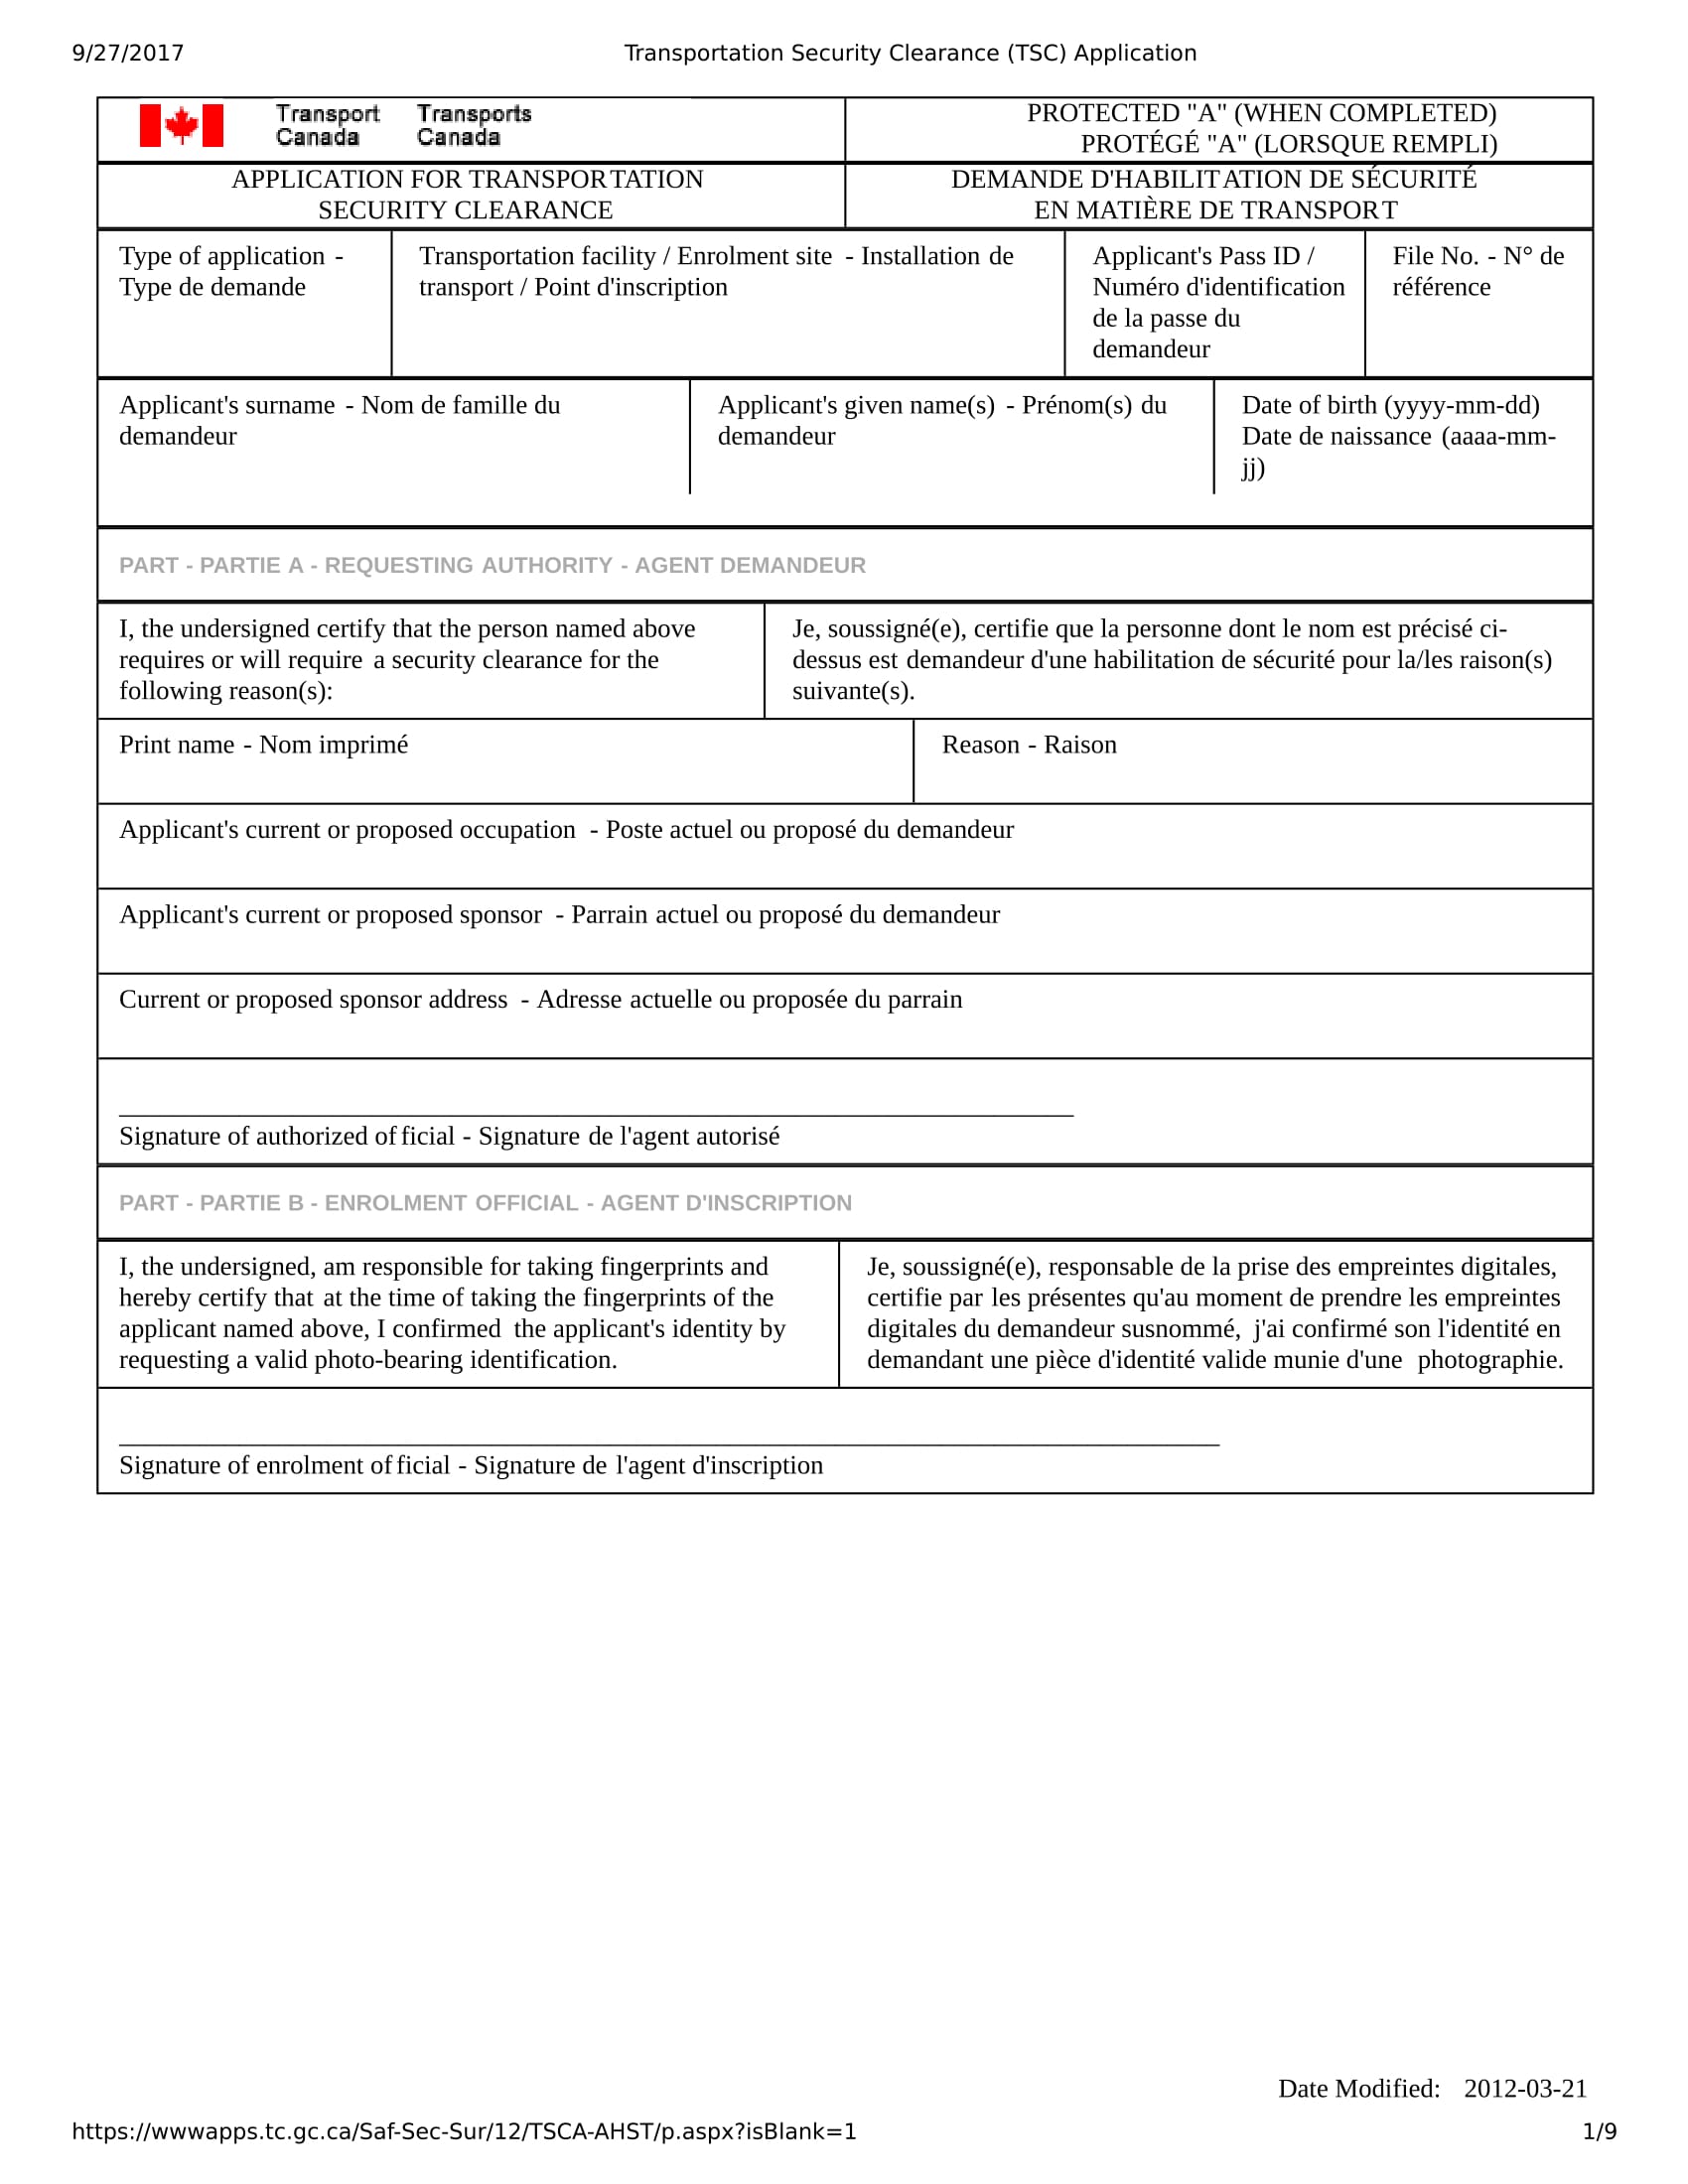 transportation security clearance application form 1